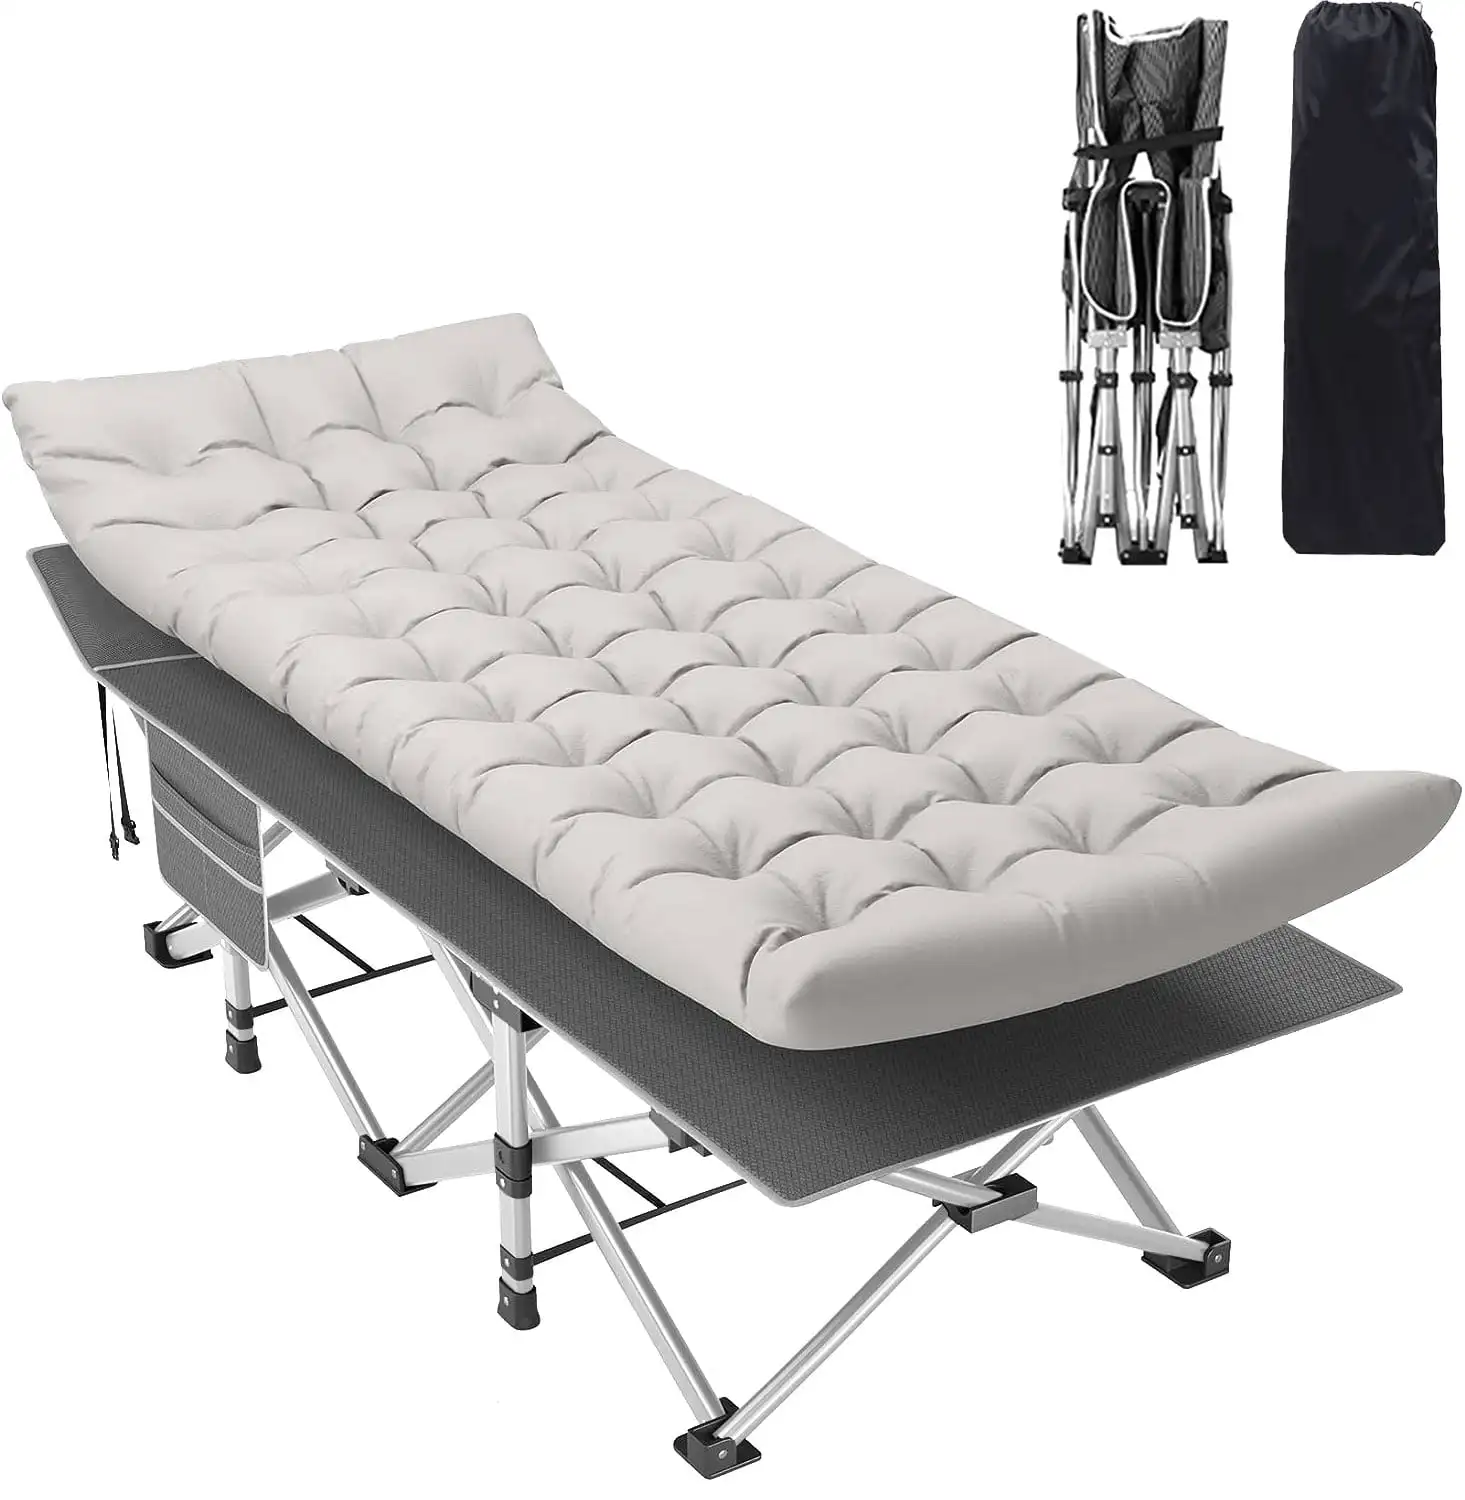 SUGIFT Portable Folding Bed 74.8in x 28 in x 14.6 in with Carry Bags and - £80.66 GBP